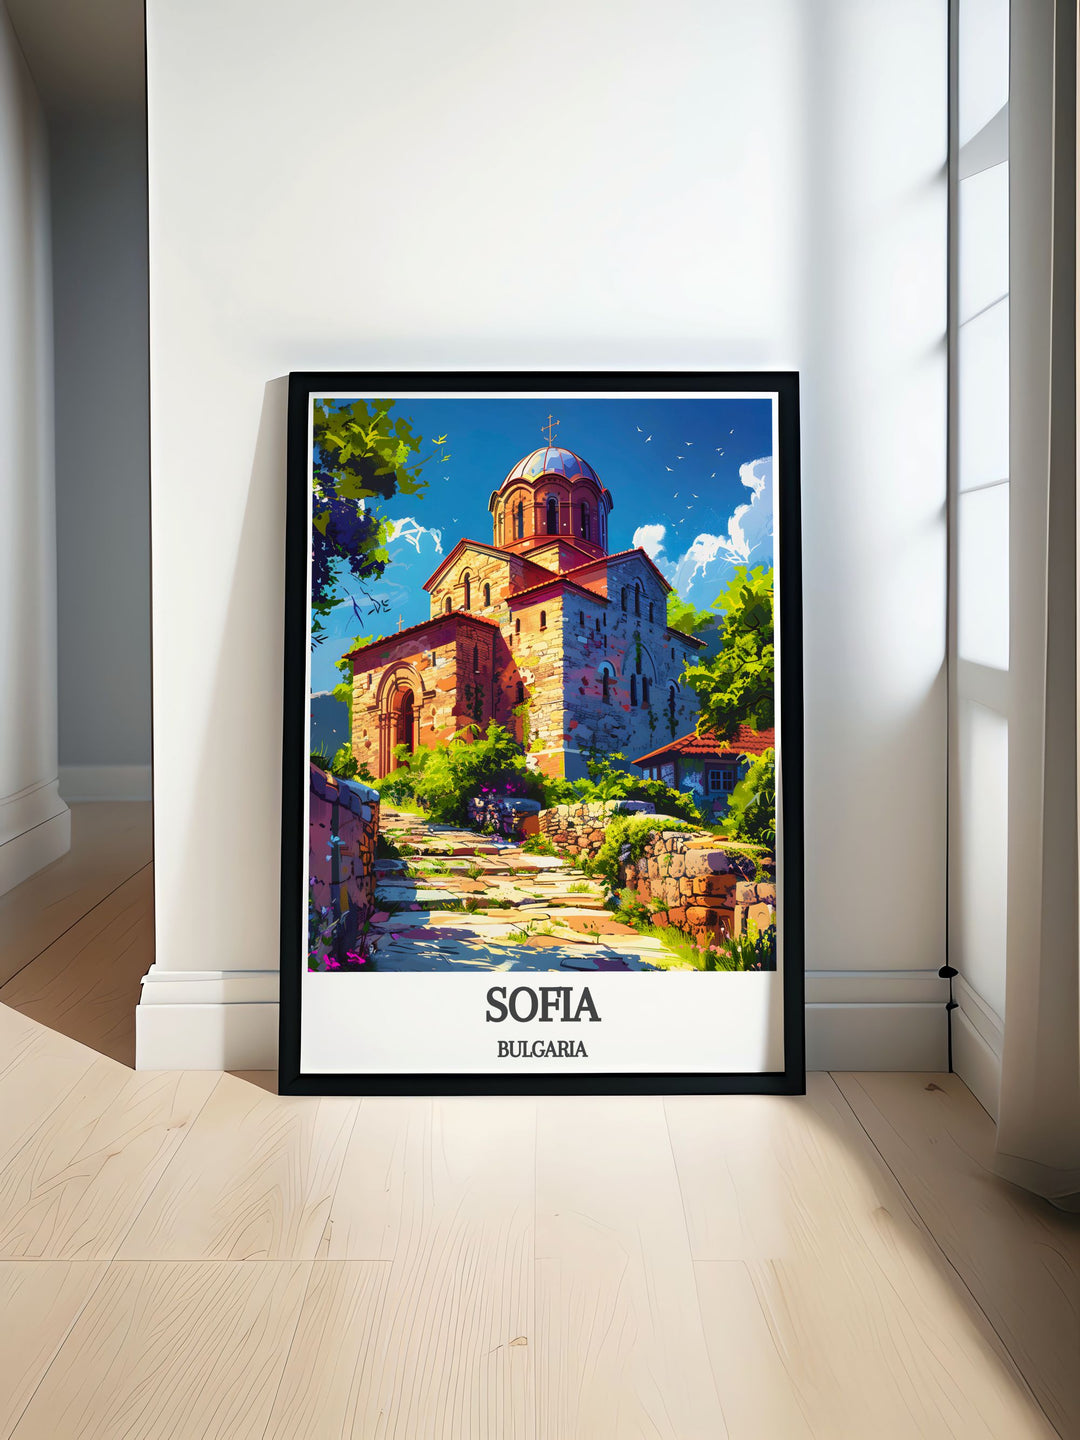 Sofia Print showcasing the stunning architecture of BULGARIA Rila Monastery surrounded by scenic mountains and lush greenery perfect for wall art and home decor enthusiasts.